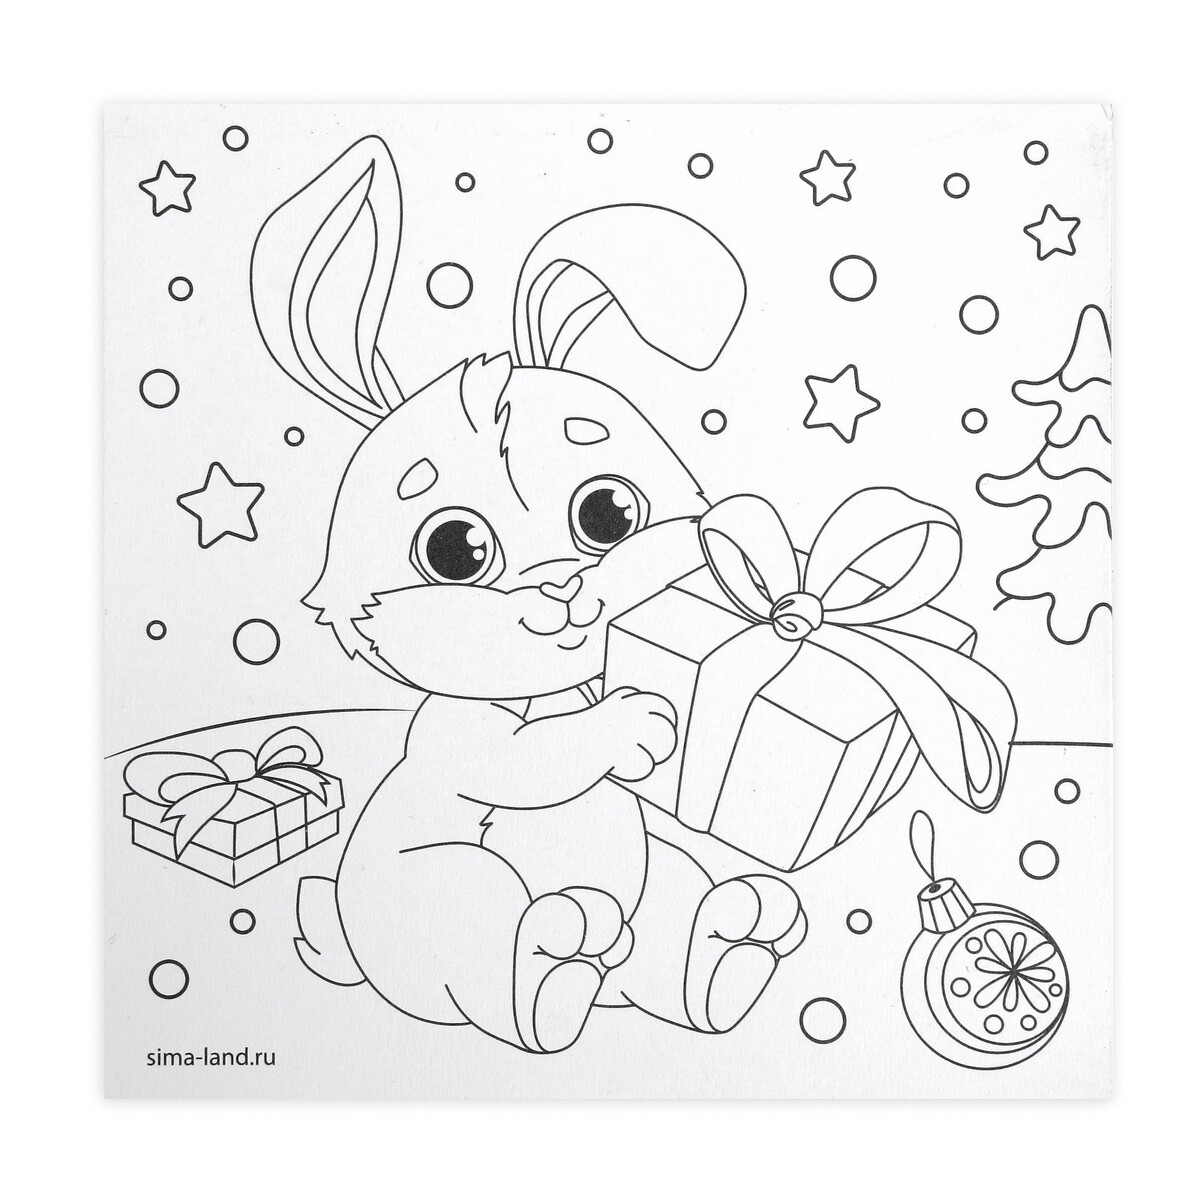 Bunny with a gift #4